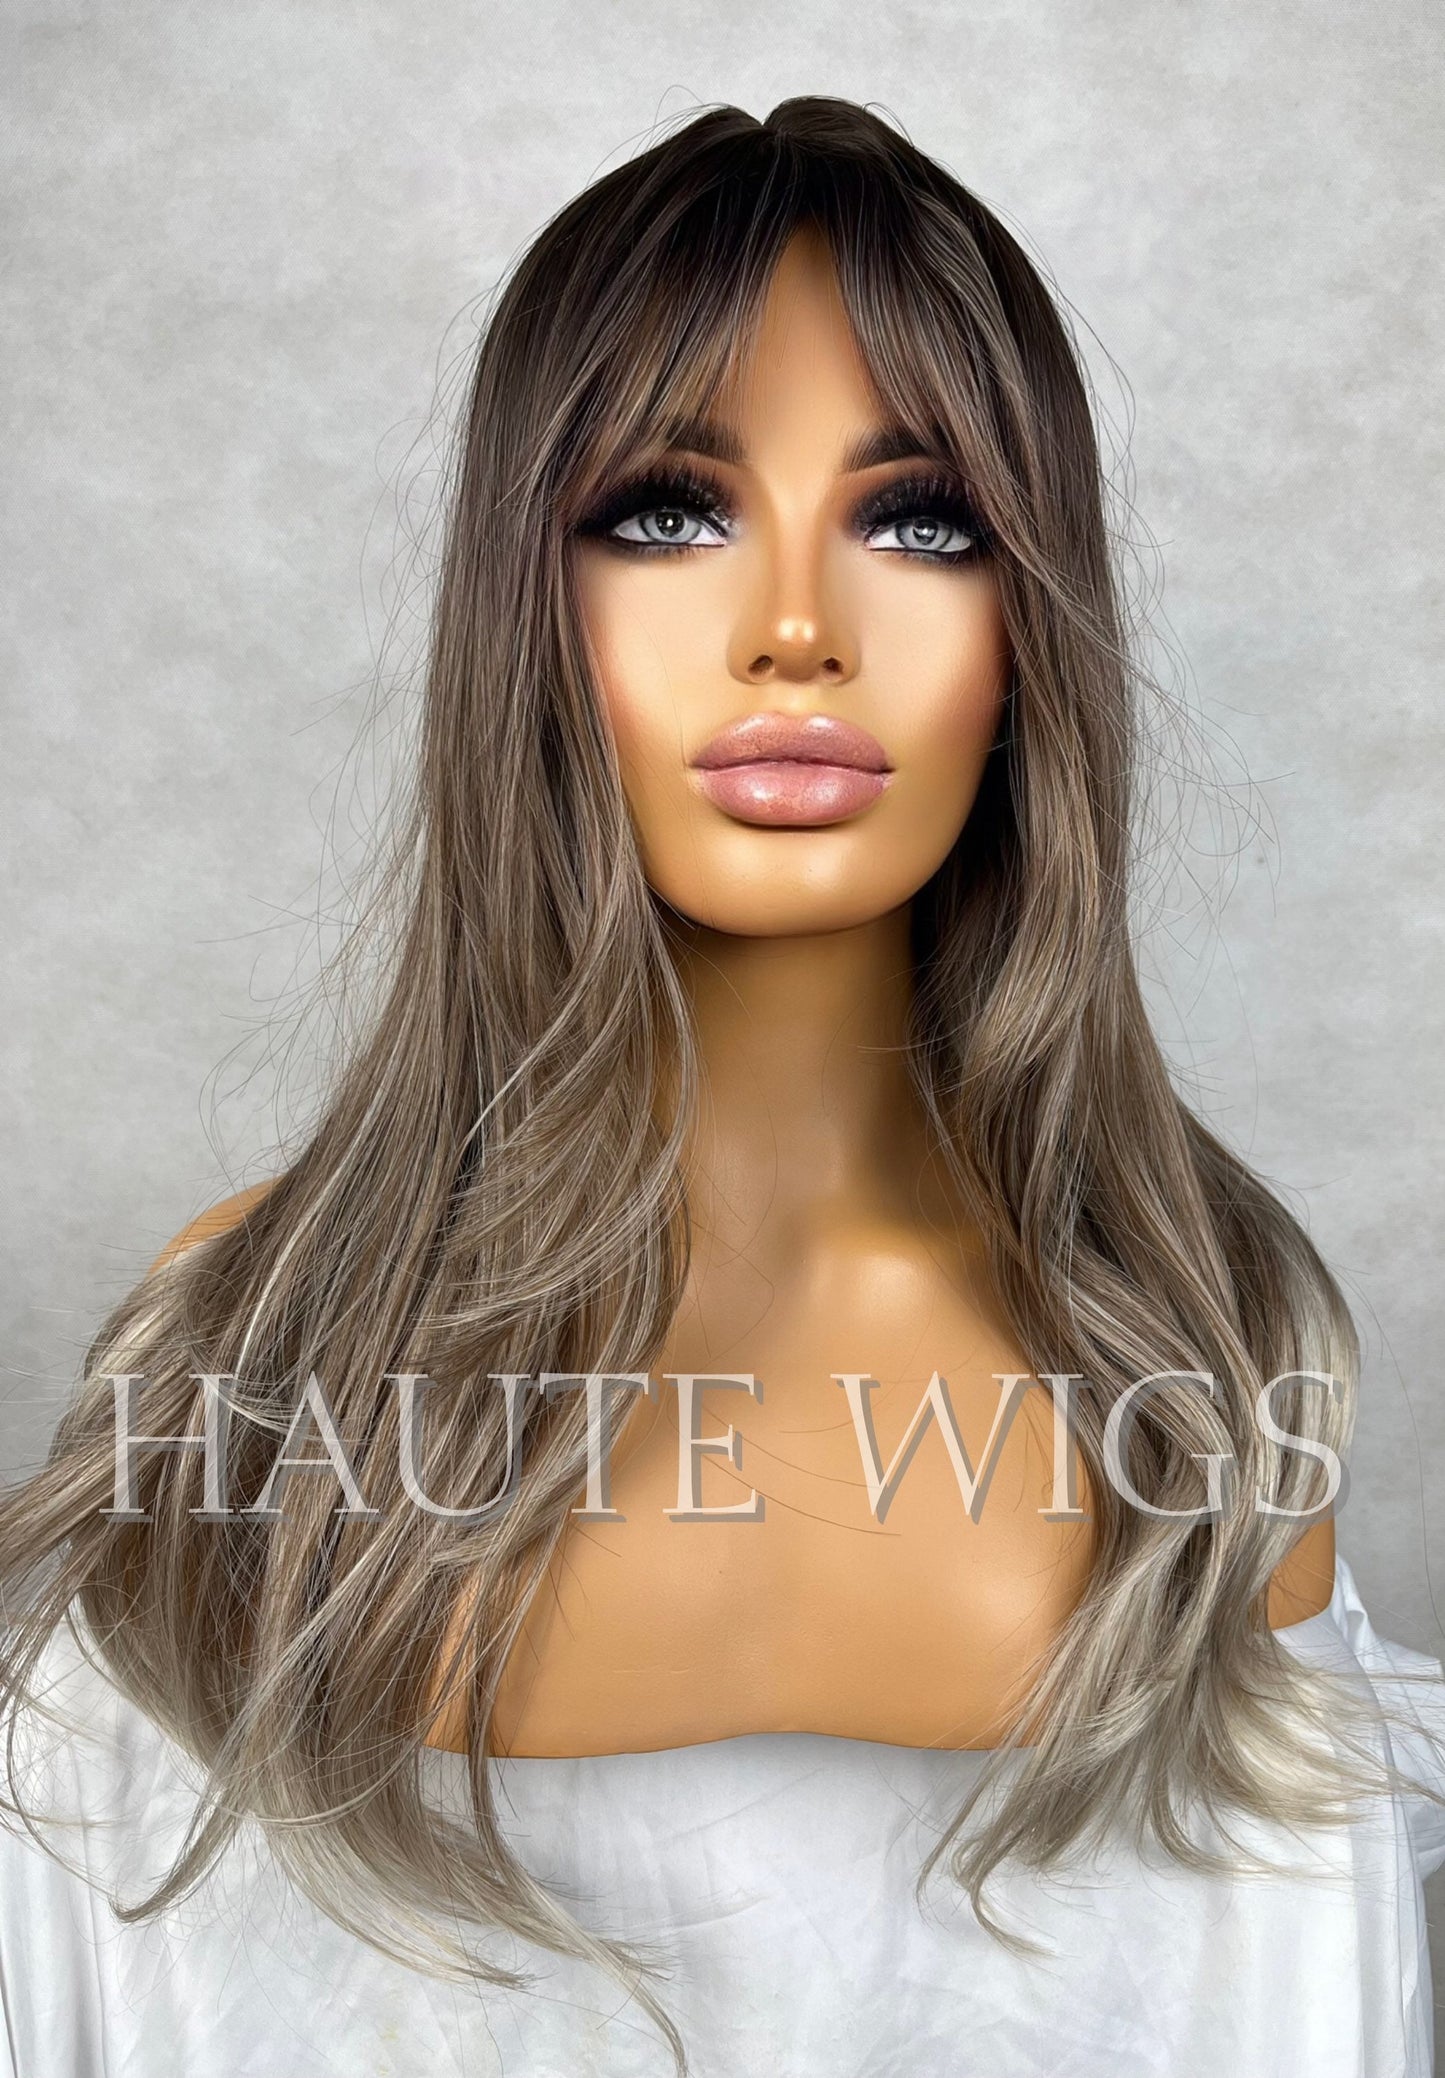 Layered Beautiful 16 Inch Ash Blonde Cool Toned Dirty Ombre Brown Wig With Fringe Bangs Center Parting Short BOB Wavy Synthetic Hair Wigs